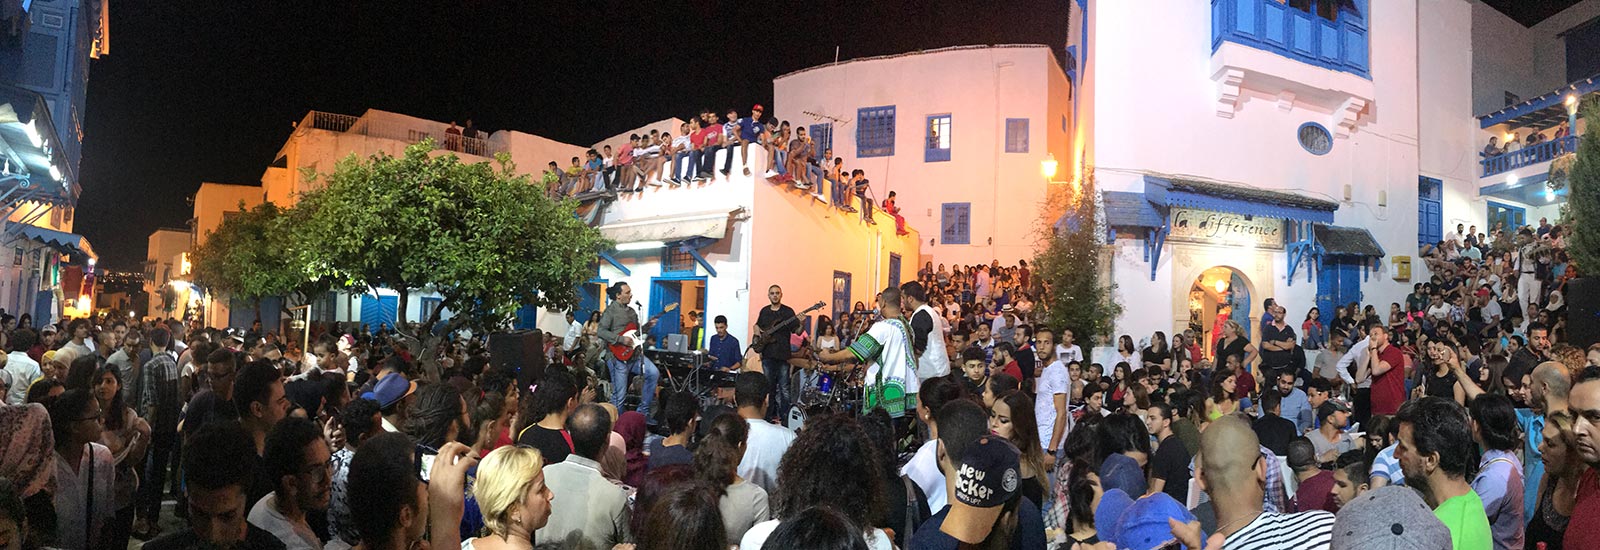 Crowd of people at the street party at night in Sidi Bou Said, Tunisia. Tunisia and not taking travel advice seriously